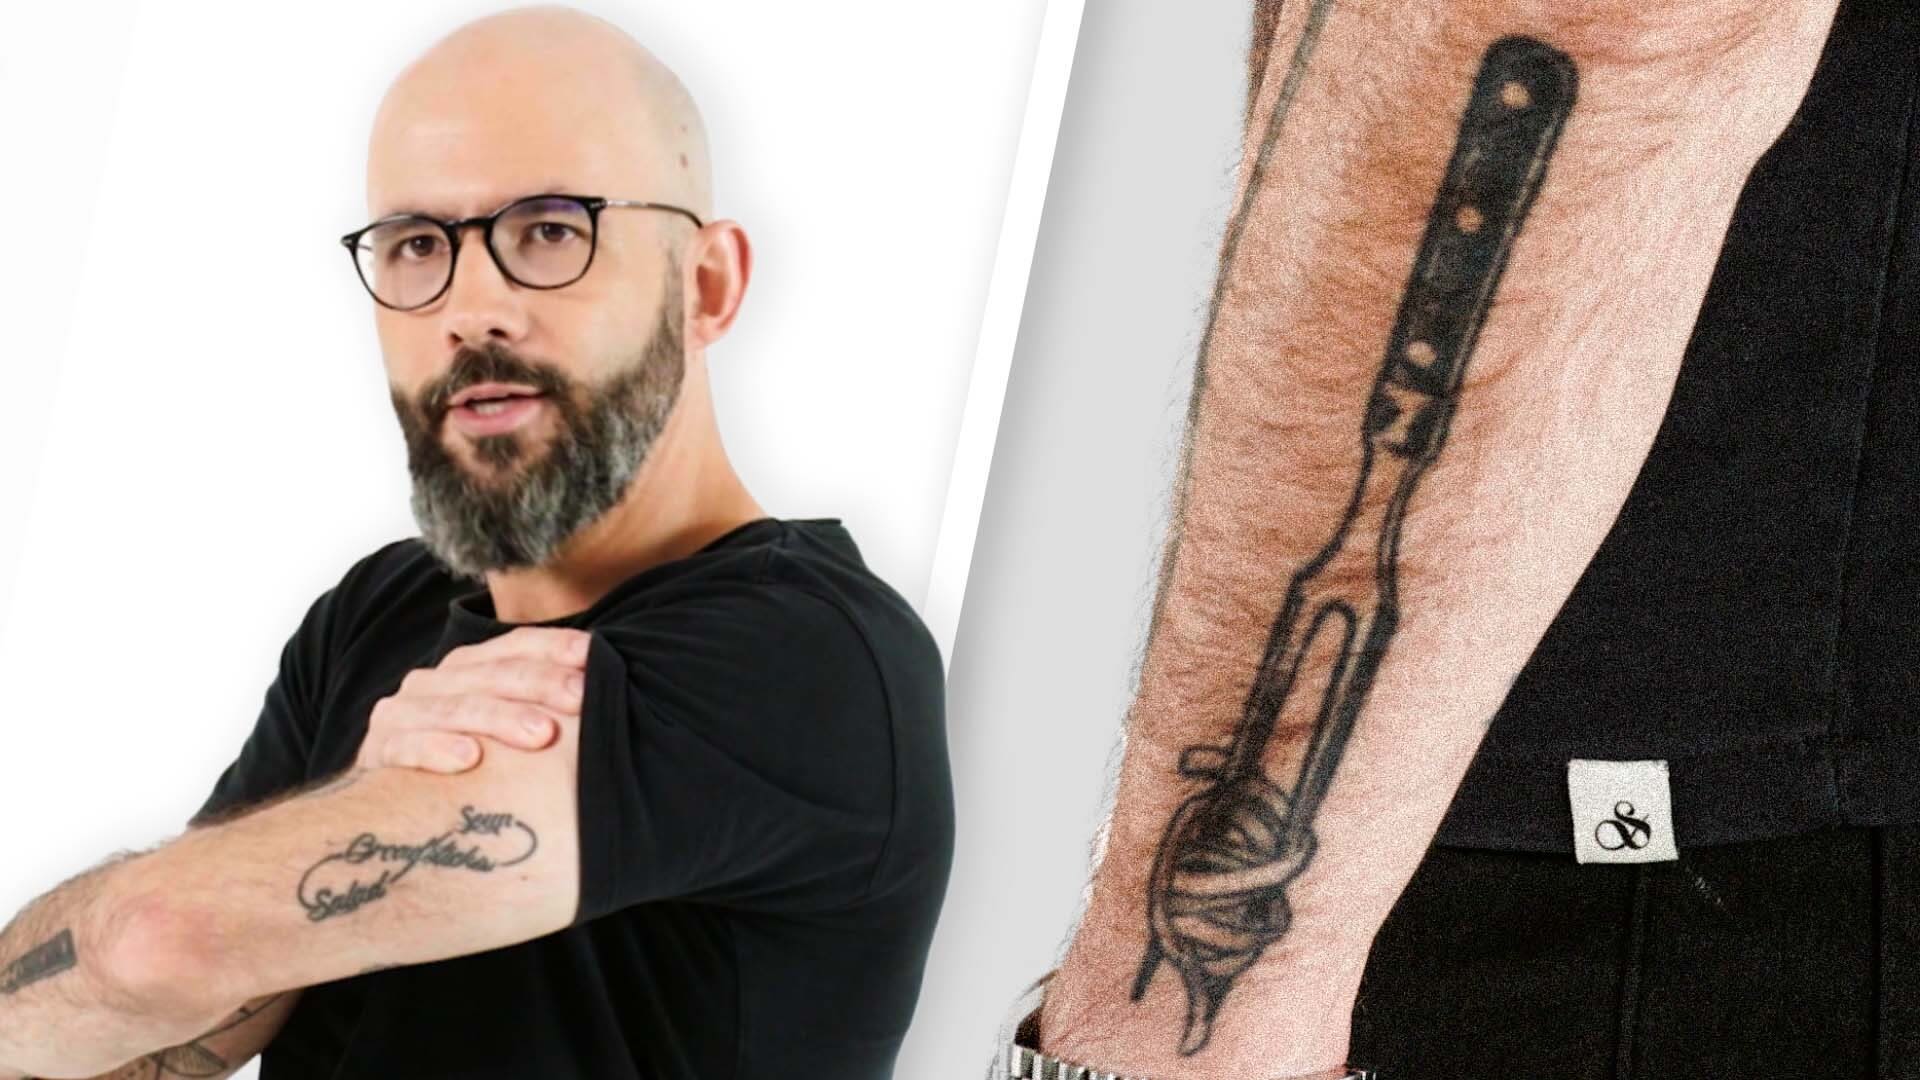 Celebrity ink: See which stars are debuting new tattoos